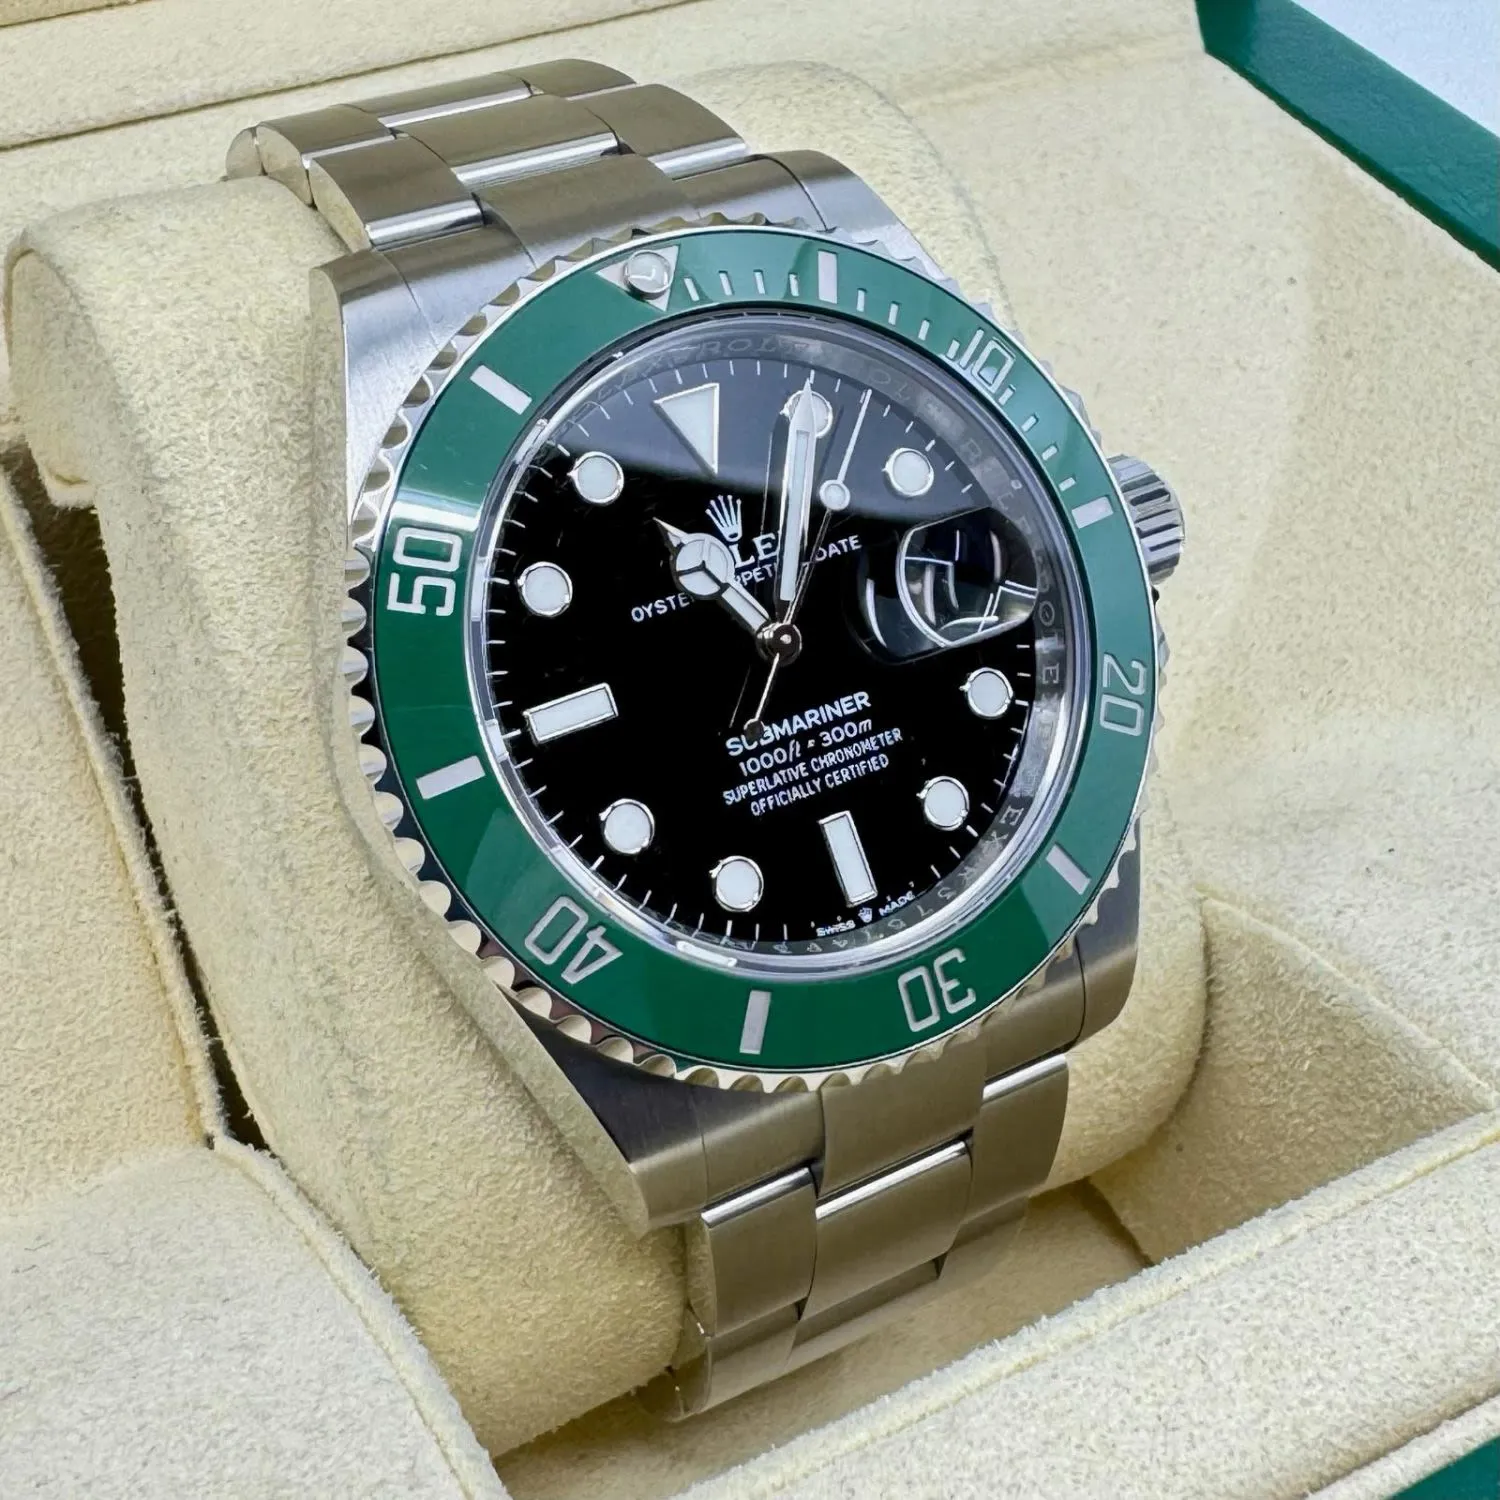 Rolex Submariner Date 1266100LV 41mm Stainless steel and ceramic Black 2